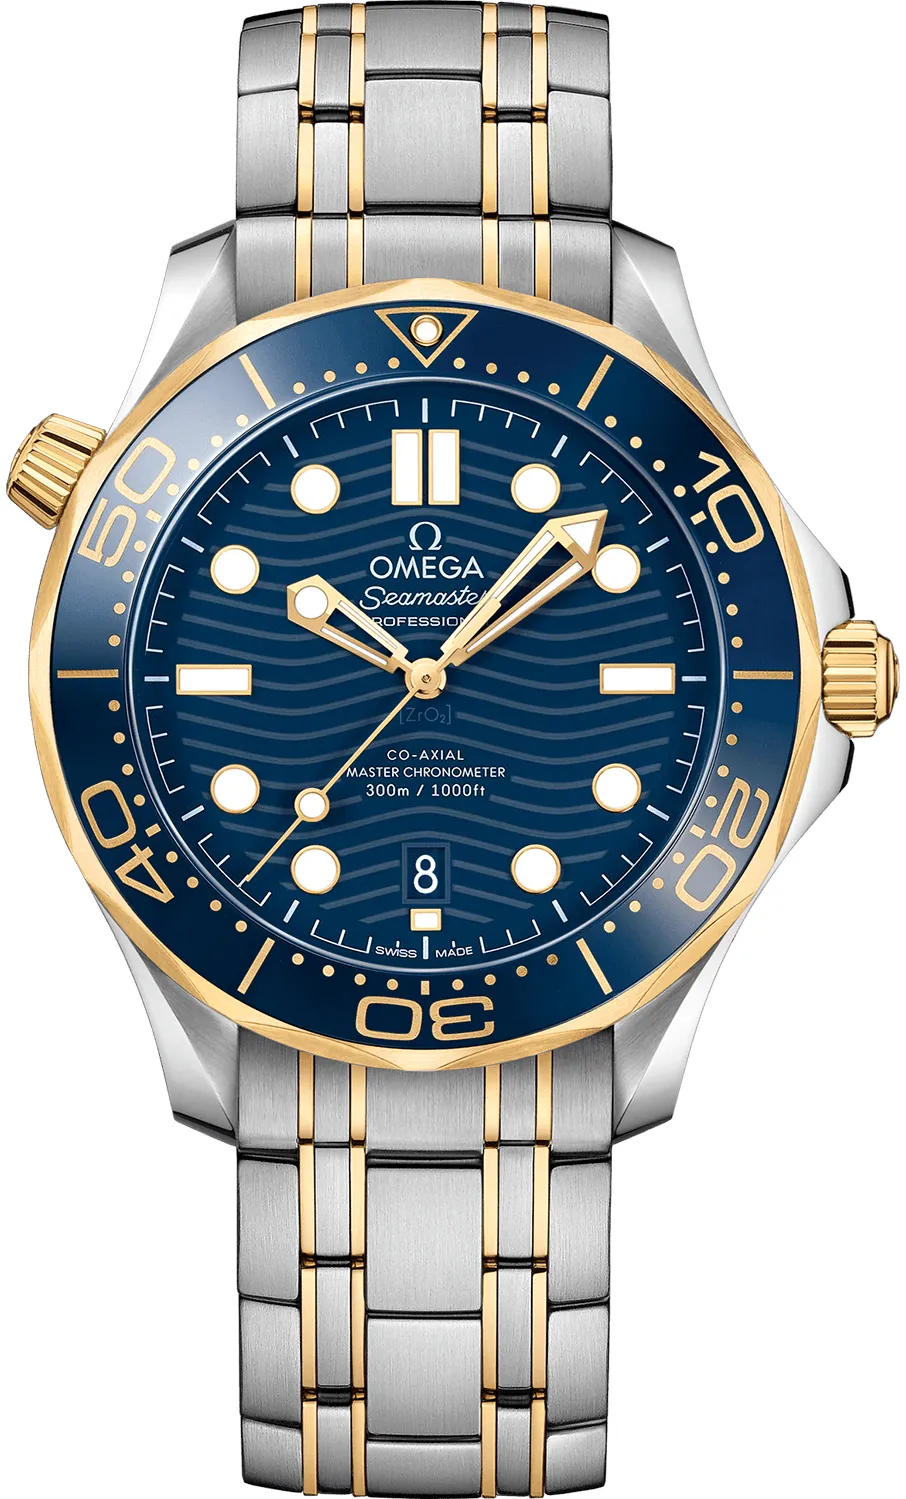 Omega Seamaster Diver 300M 210.20.42.20.03.001 42mm Yellow gold and stainless steel